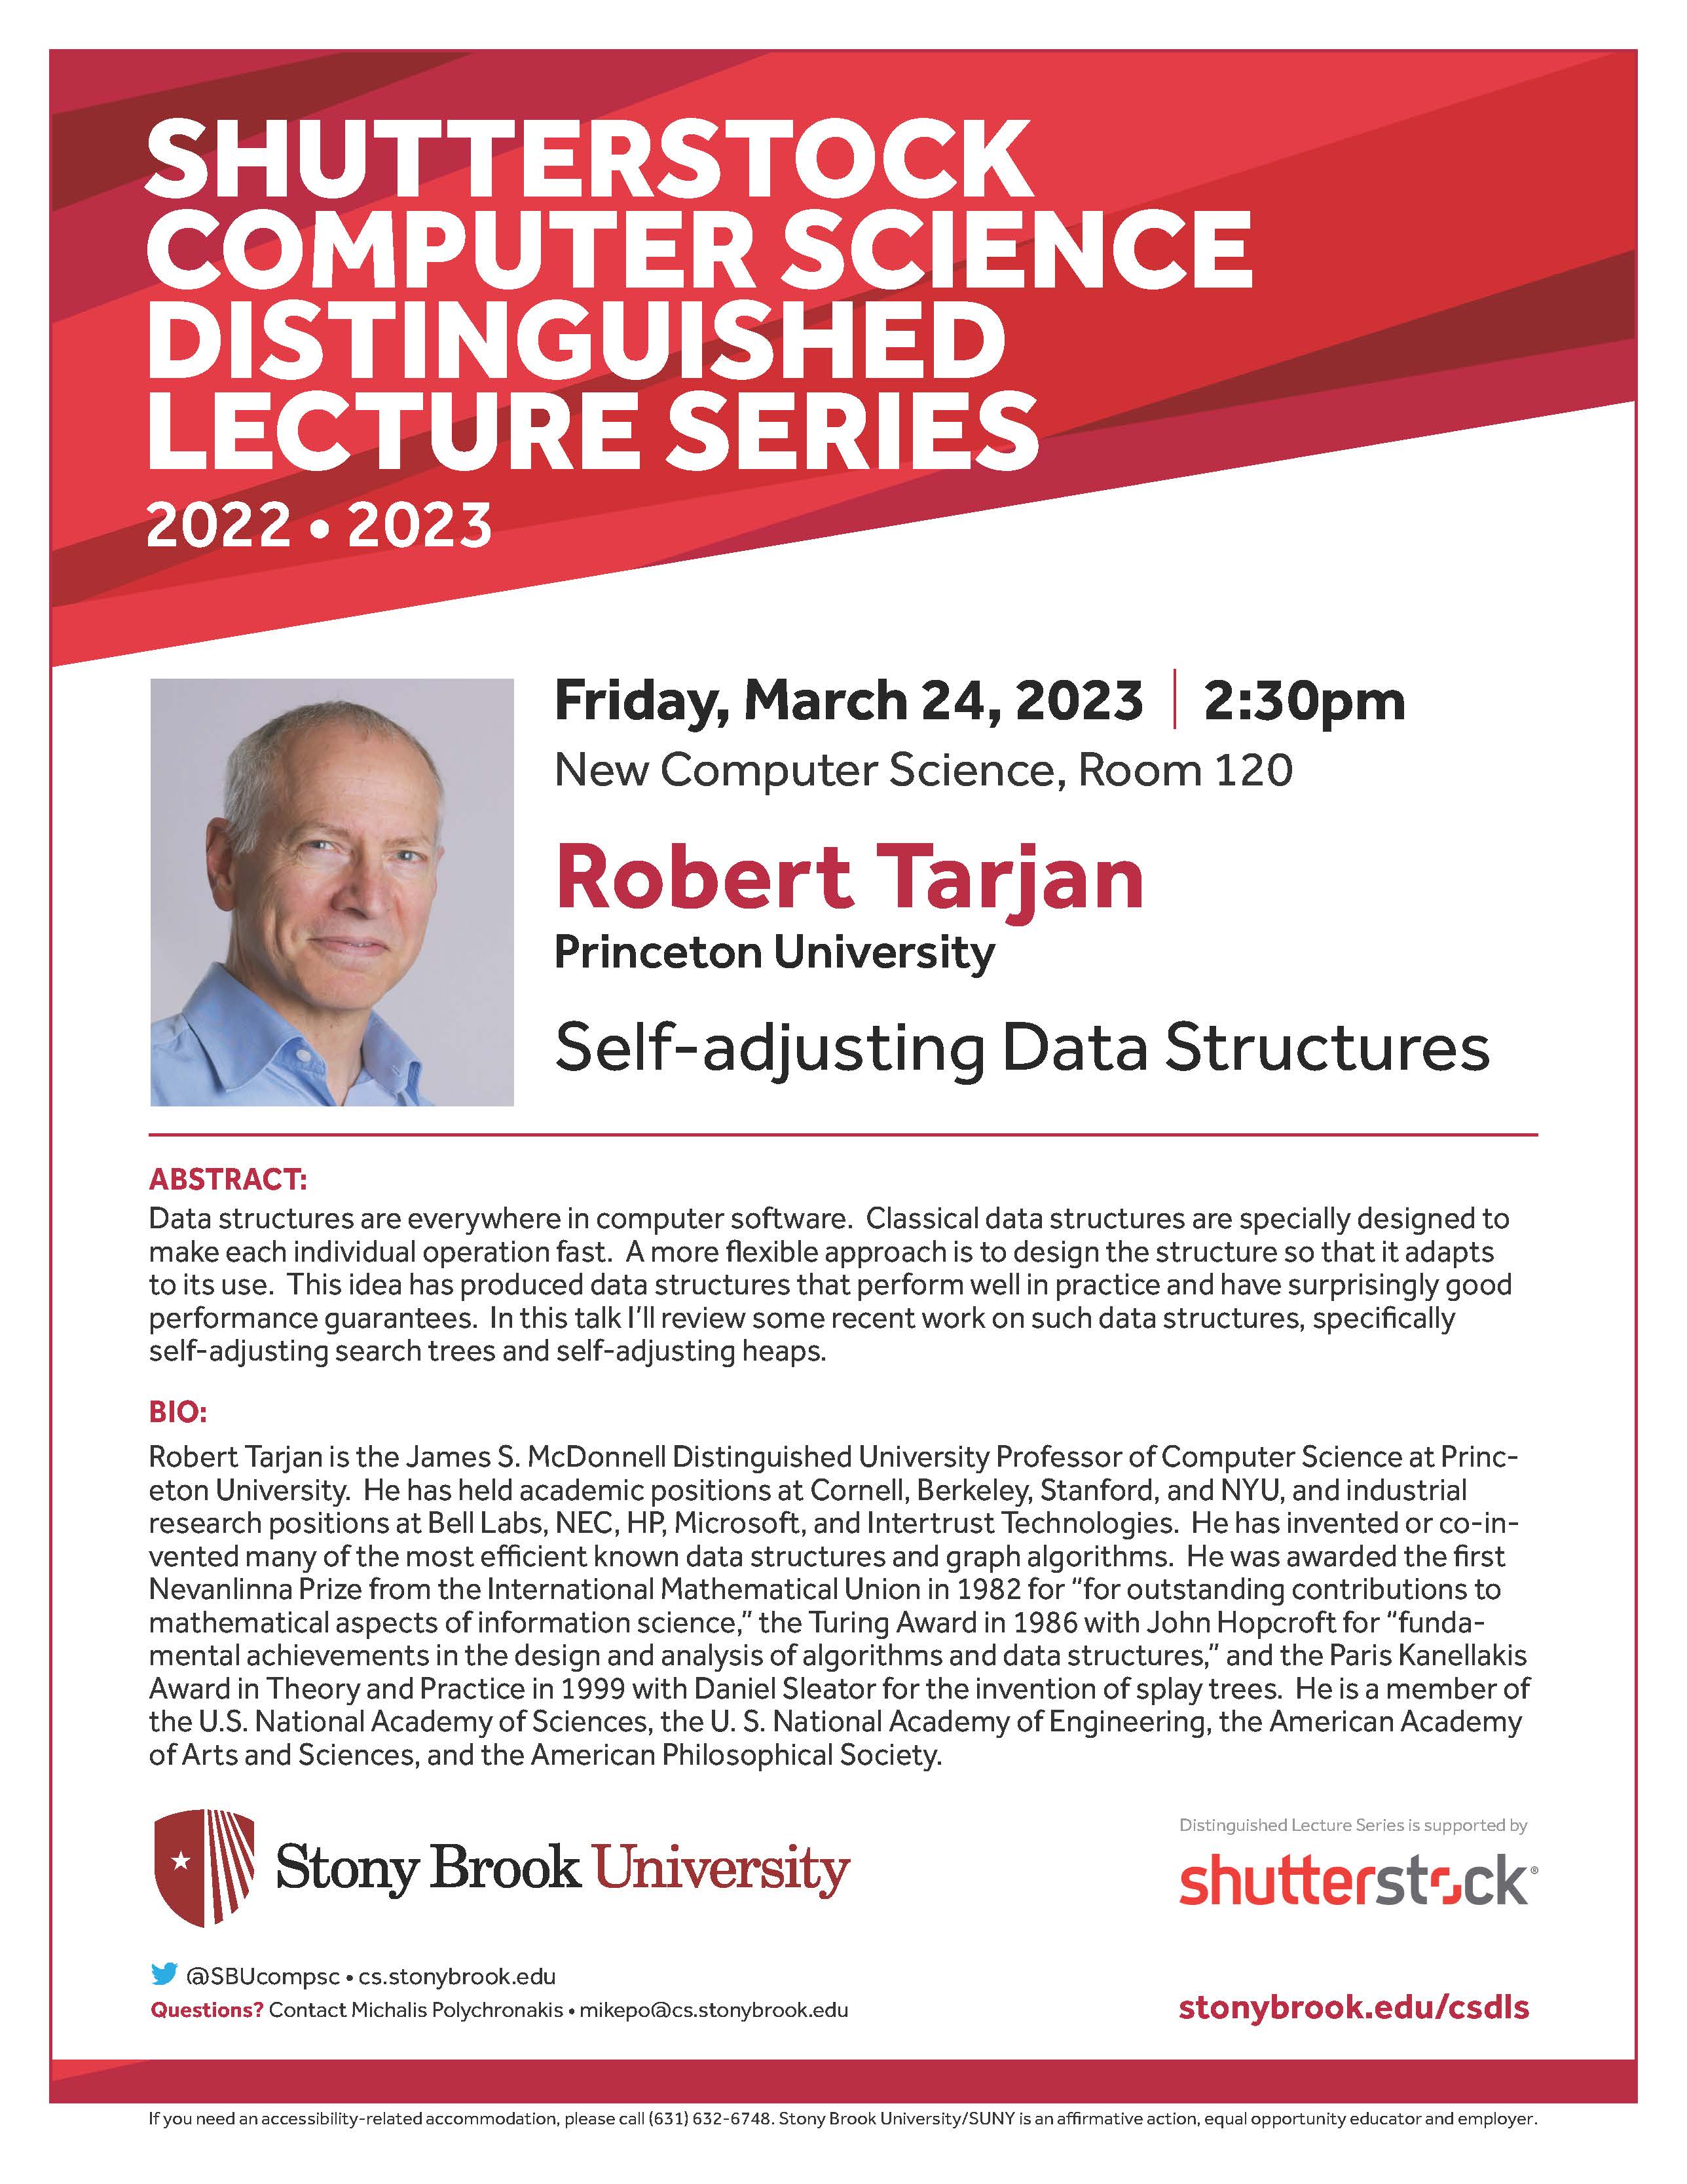 On March 24 at 2:30p we welcome Robert Tarjan from Princeton University for a Shutterstock Distinguished Lecture, Self-adjusting Data Structures